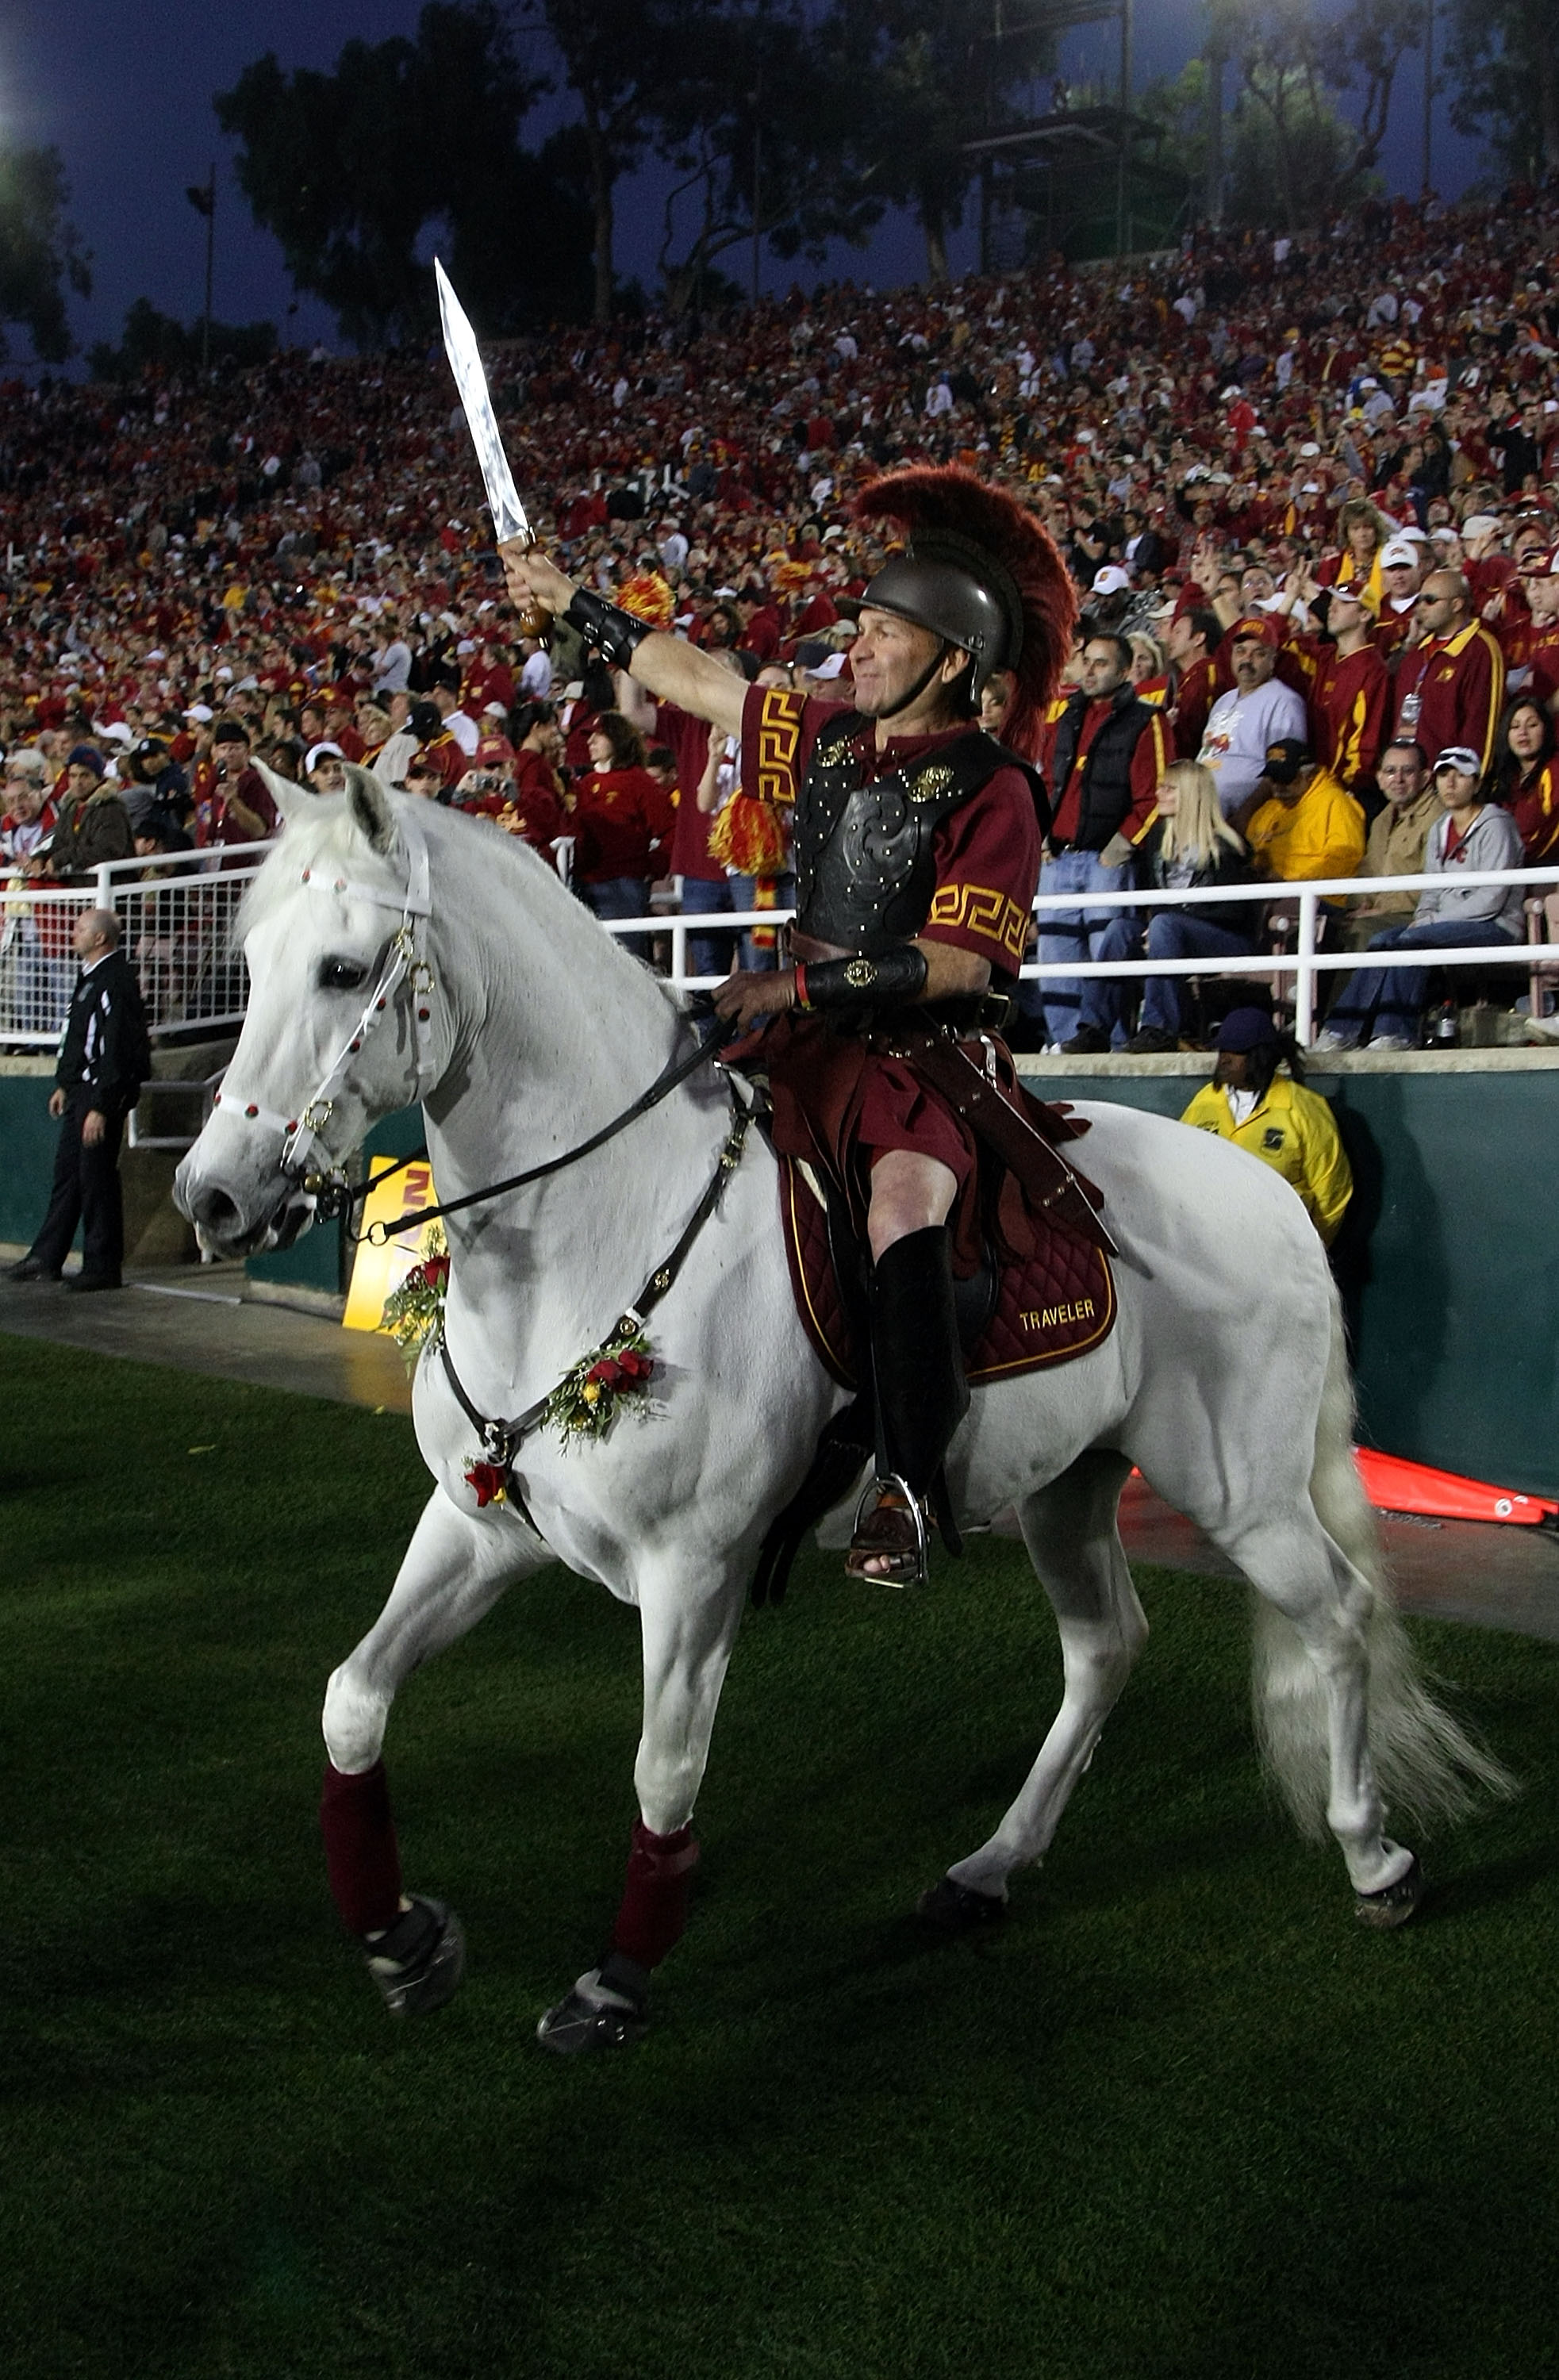 PASADENA, CA - JANUARY 01:  USC Trojans Hector Aguilar trots horse Traveler on the sideline during the Rose Bowl presented by Citi between the USC Trojans and the Illinois Fighting Illini at the Rose Bowl on January 1, 2008 in Pasadena, California.  The T